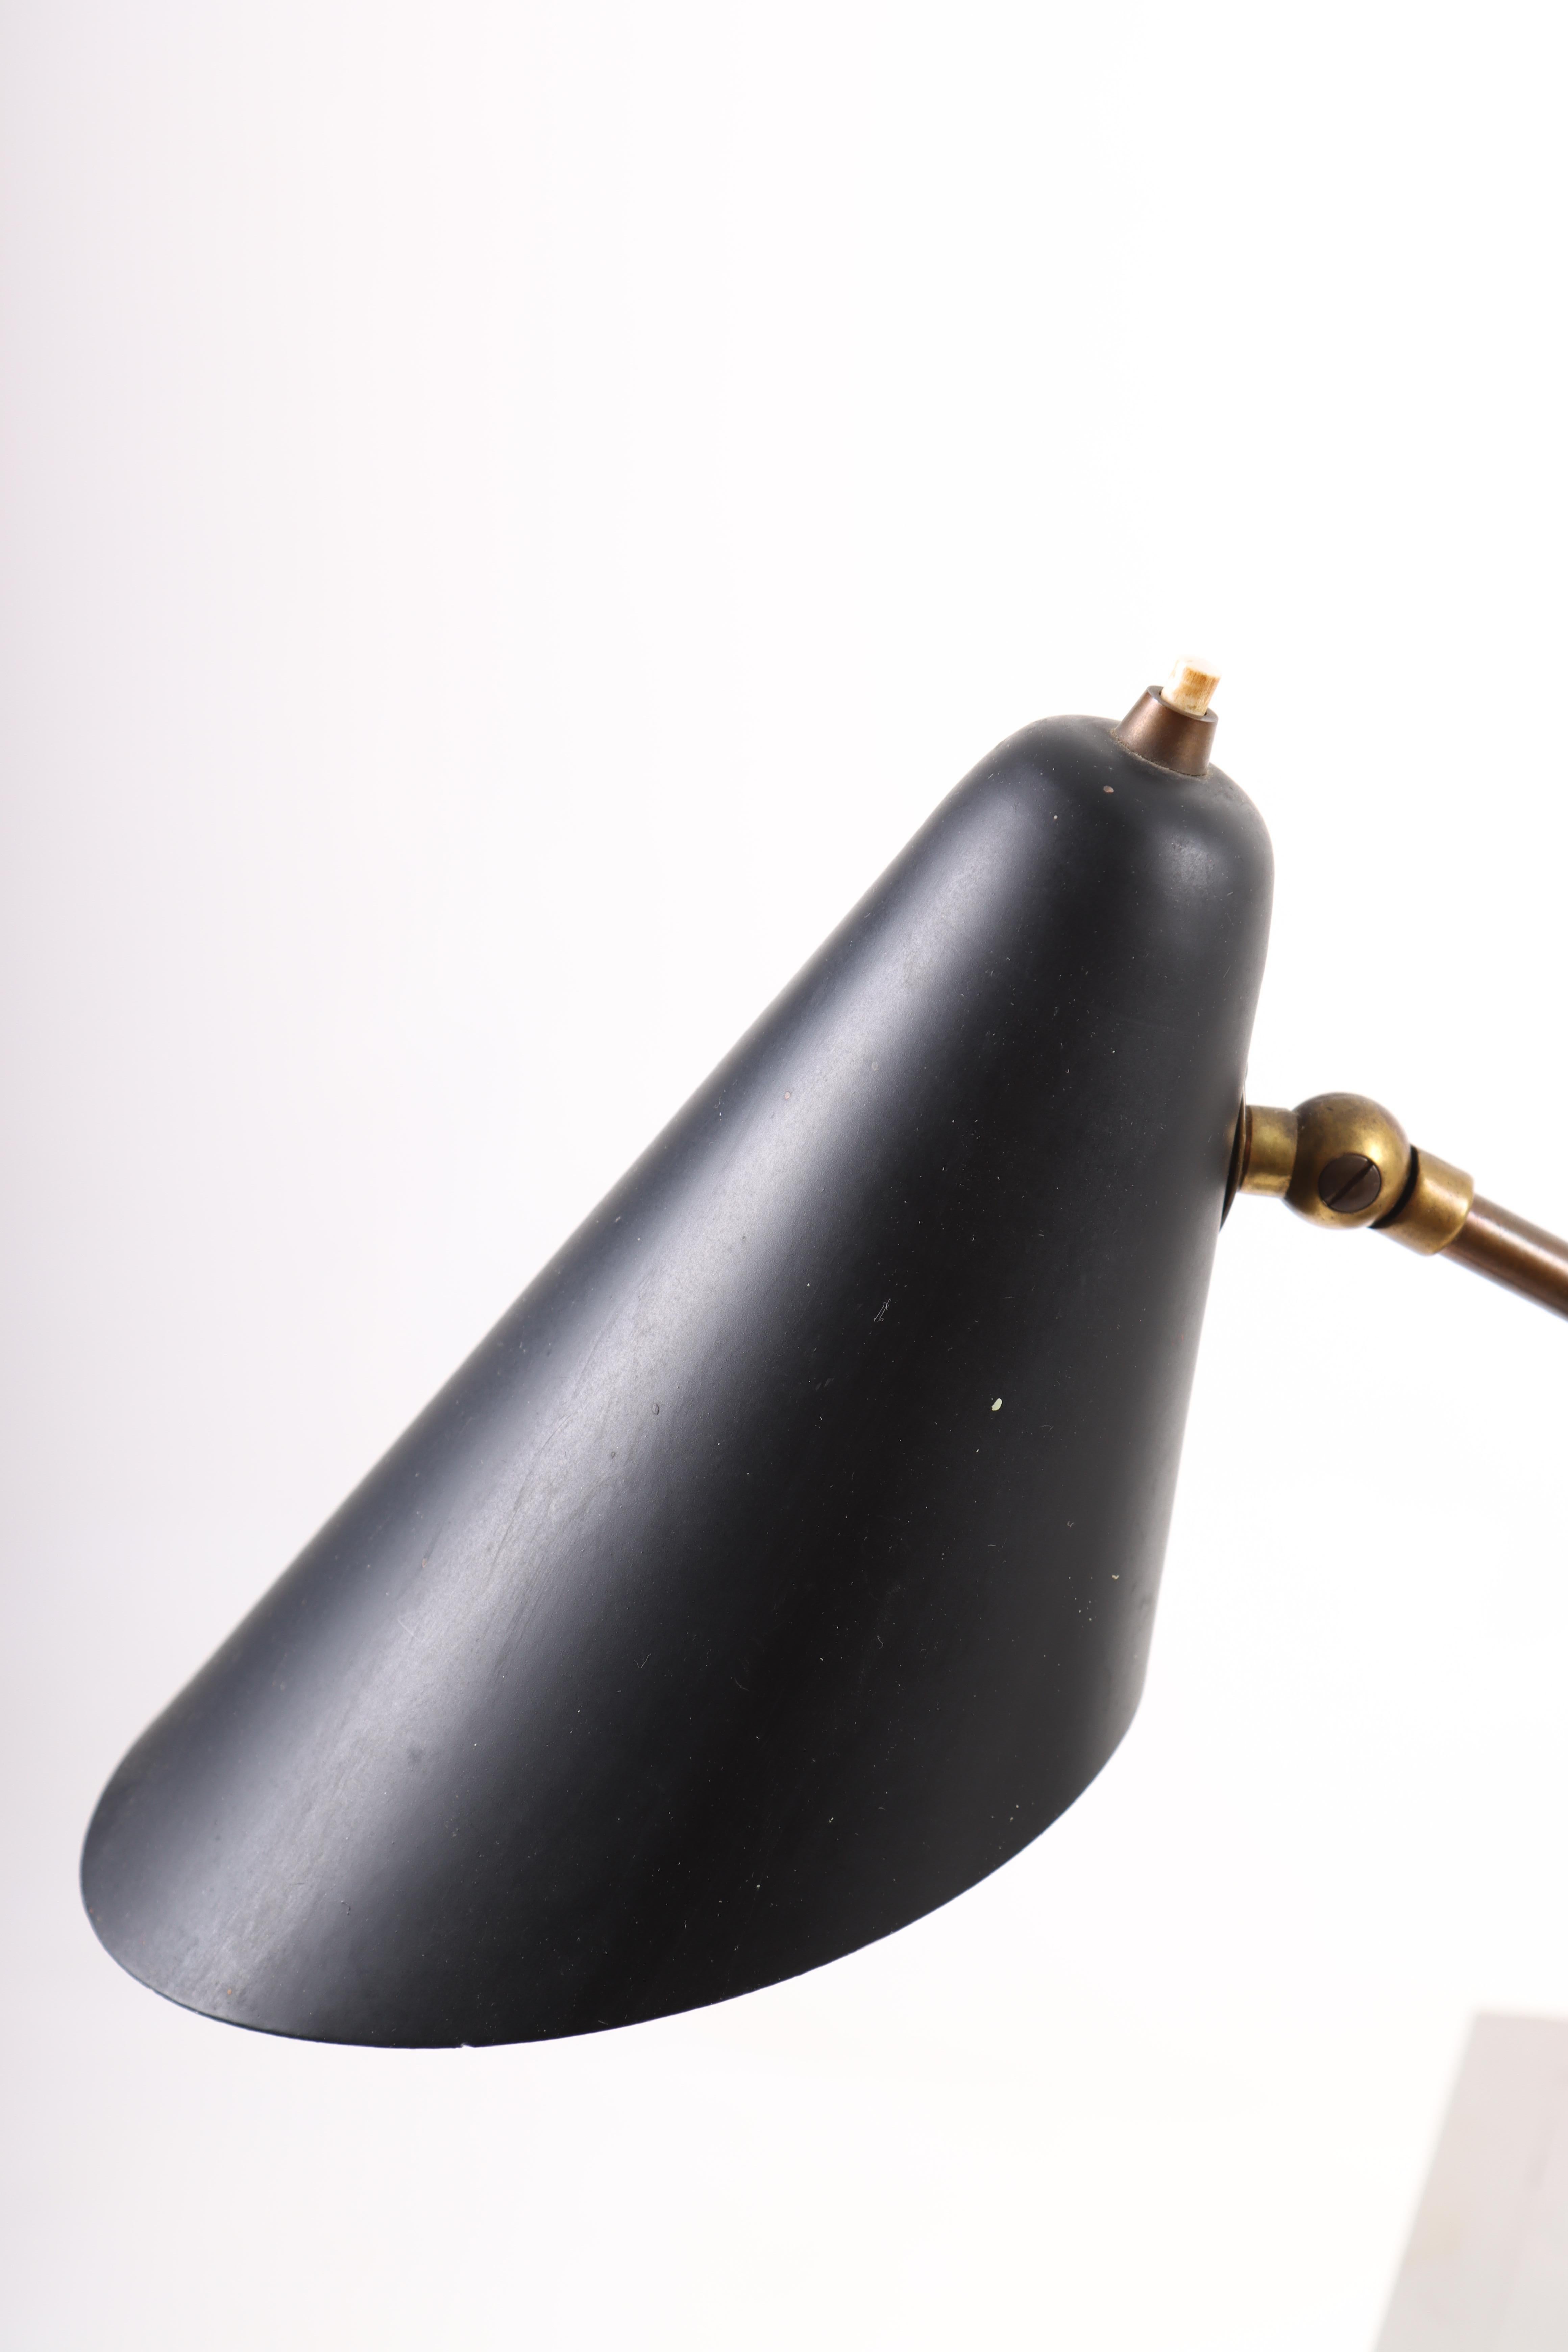 Scandinavian Modern Midcentury Table Lamp with Brass Details, Made in Denmark, 1950s For Sale